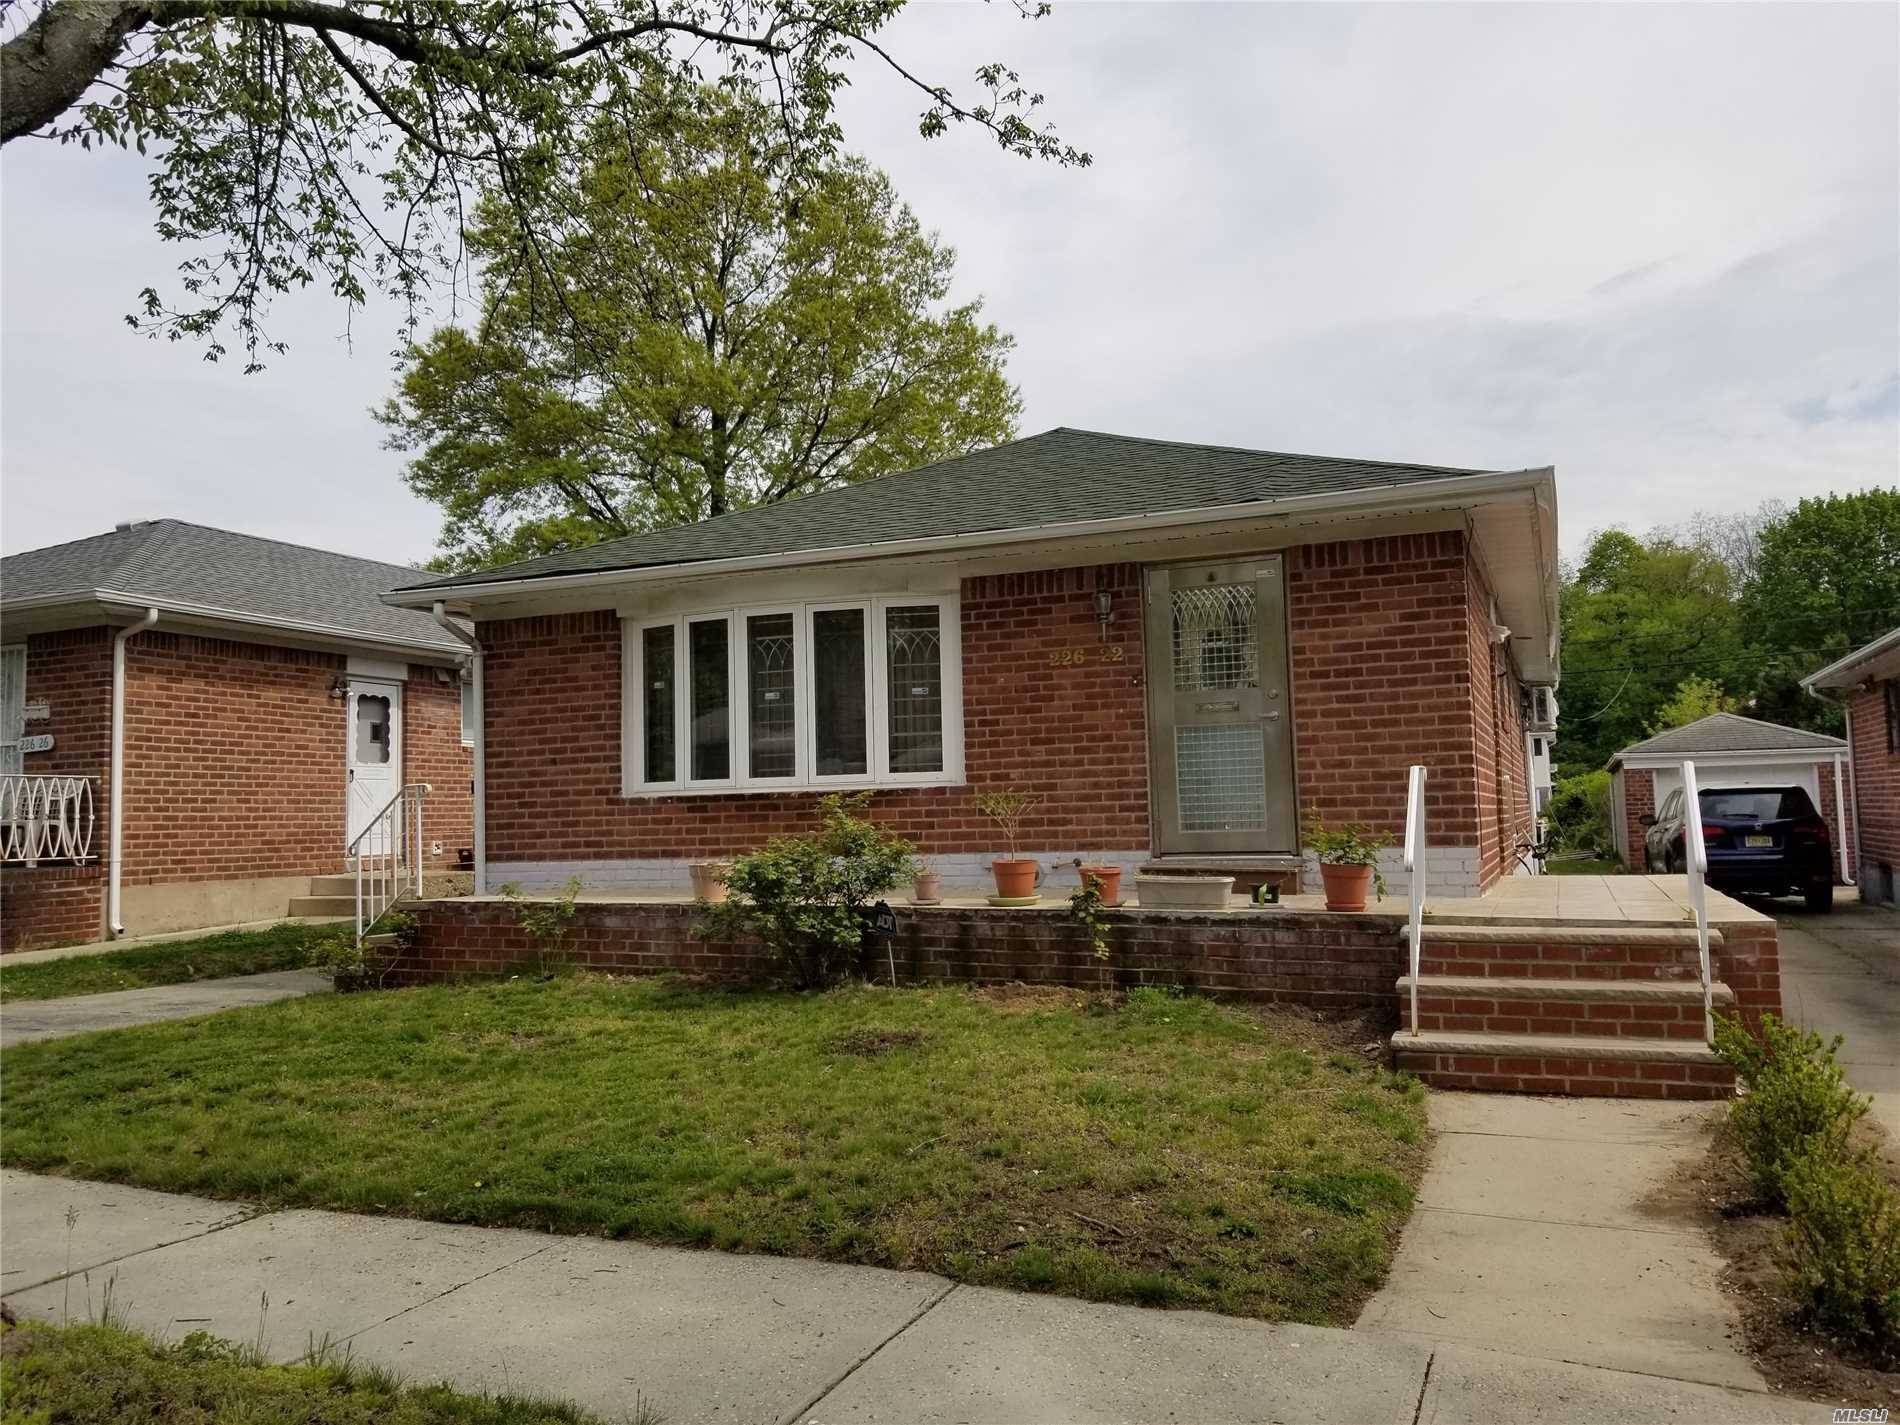 Desirable Oakland Gardens Near To Alley Pond Park, Solid Whole Brick Ranch With Very Spacious Full Finished Basement On 41X100 Lot, 26.